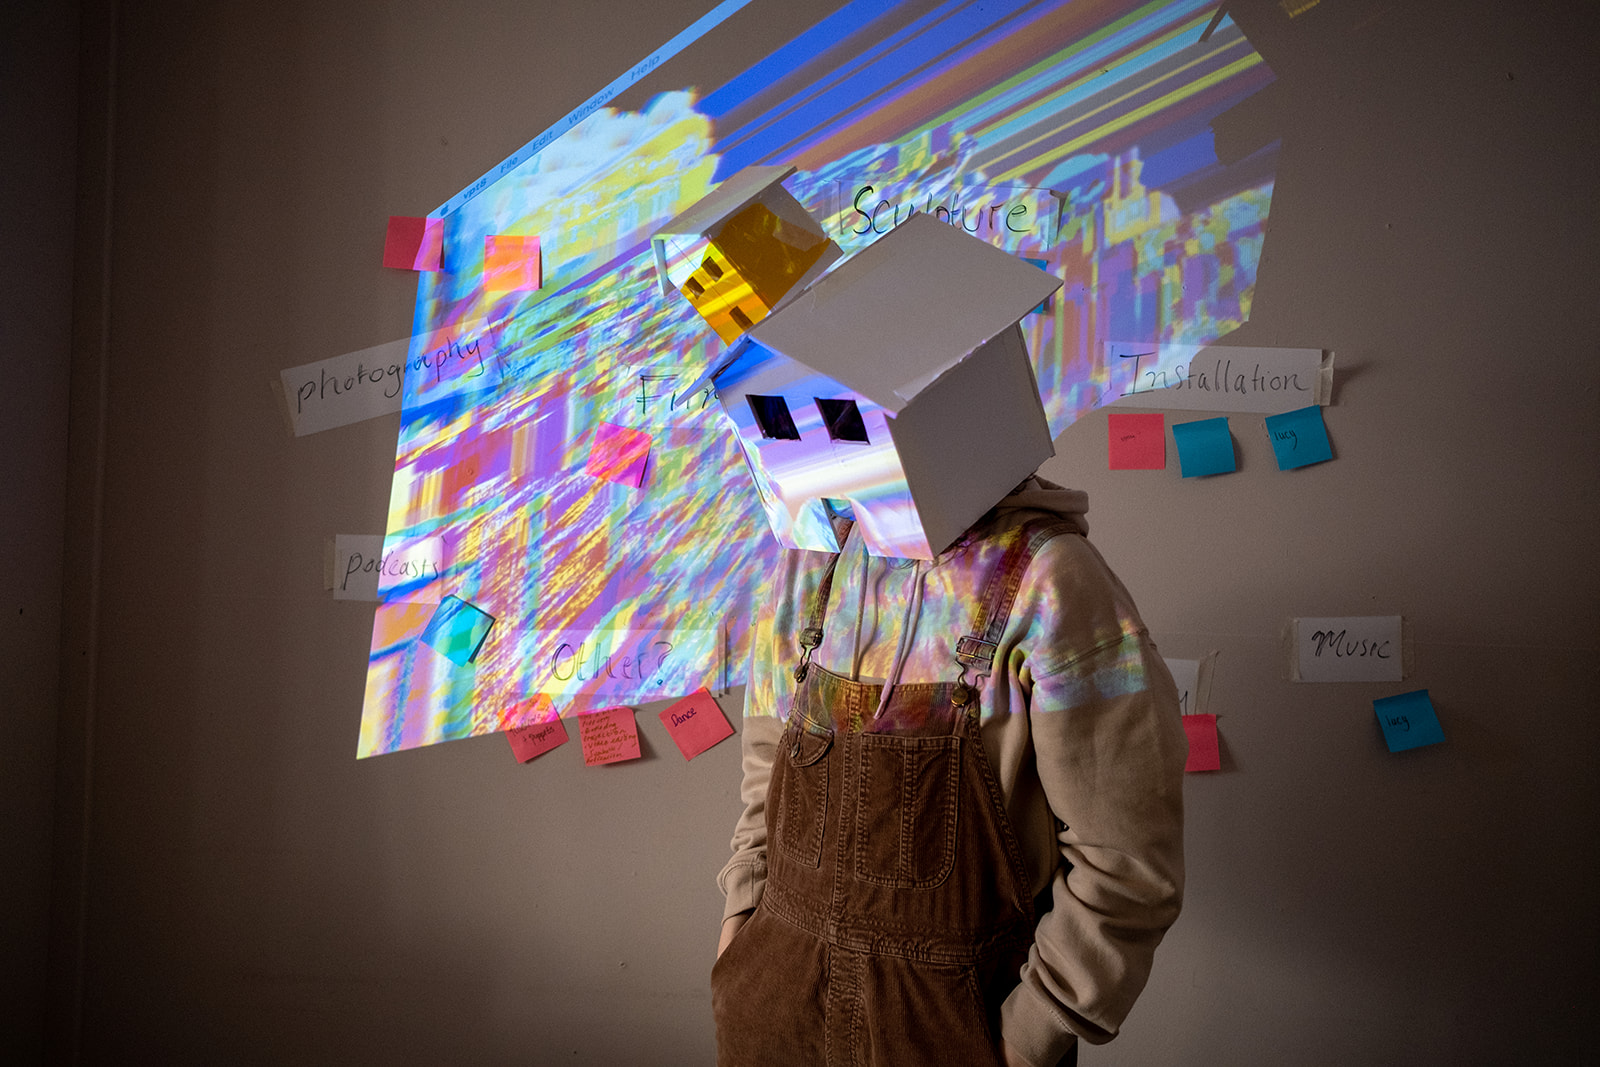 individual with a house shaped cut out box on their head with pictures projected on the wall behind them as part of art project